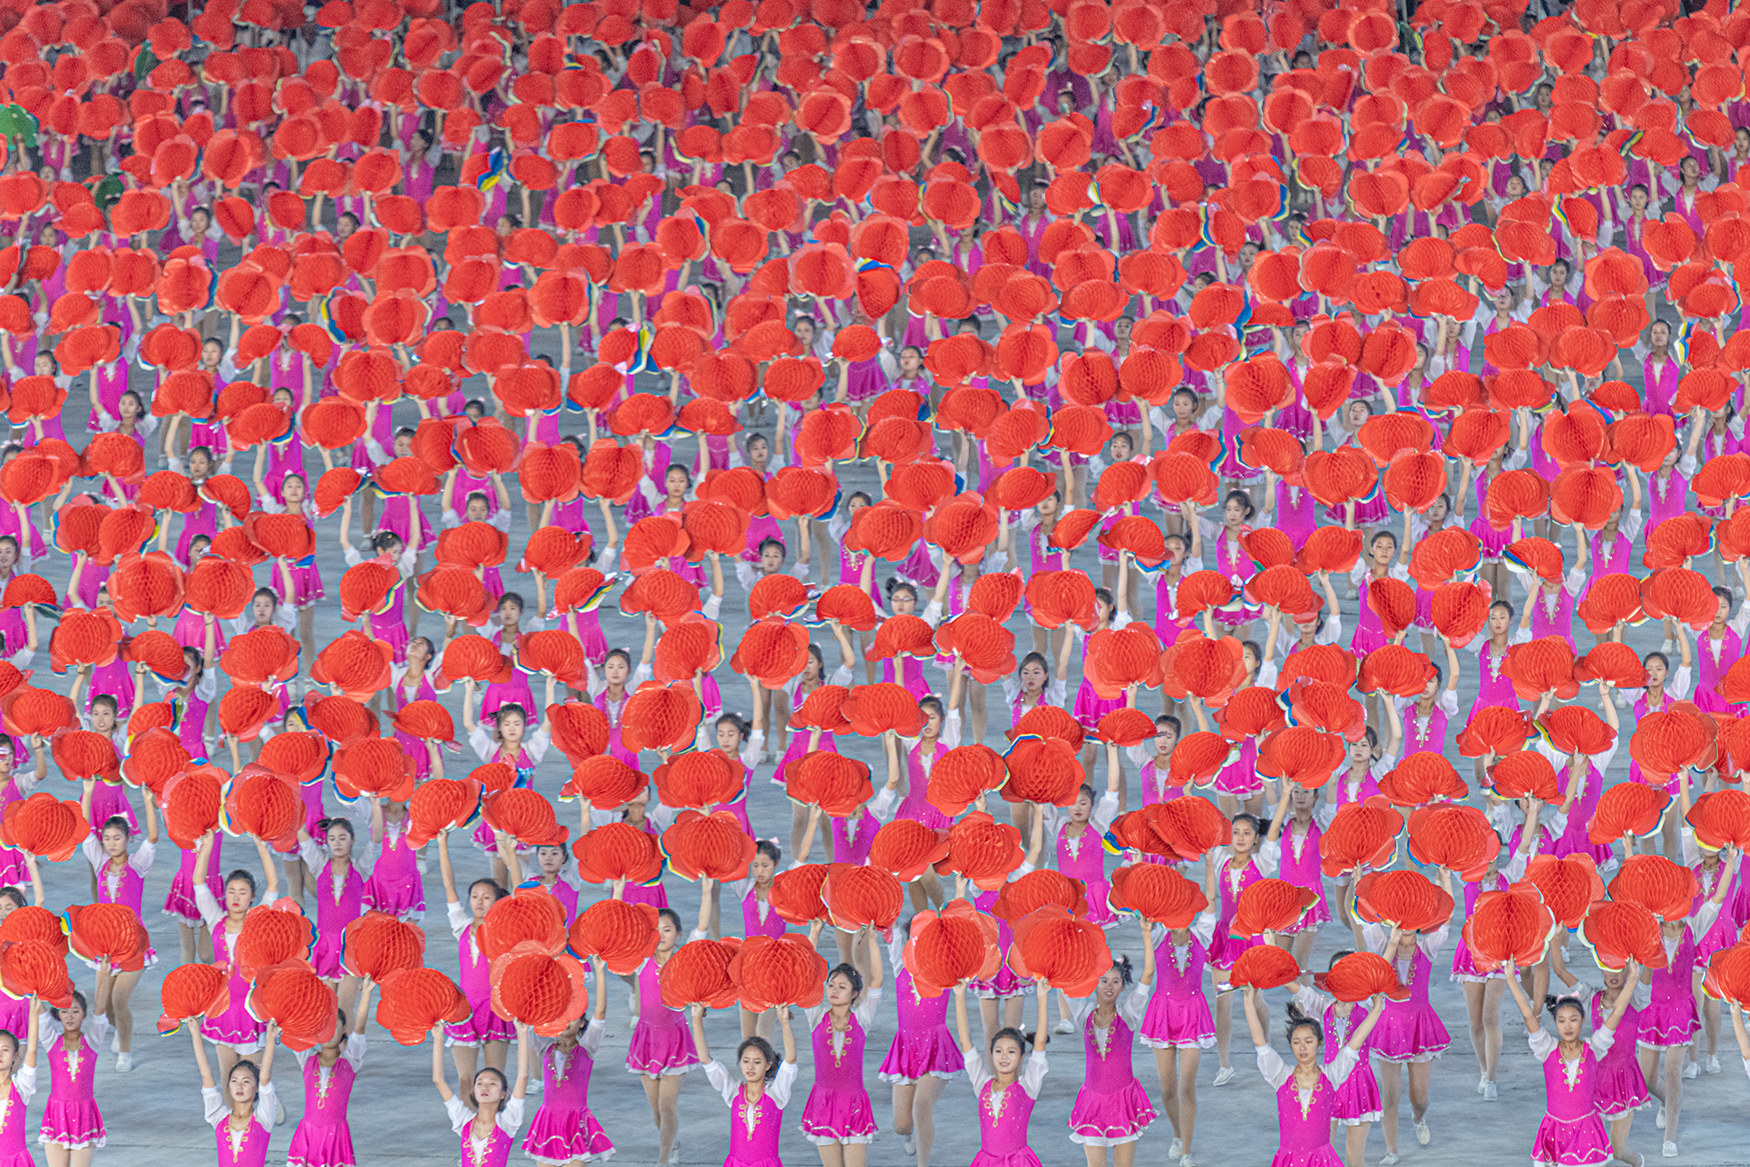 Many young North Koreans in colorful outfits participate in Arirang Mass Games, the largest performance of theater, artistry, gymnastics, and propaganda stories in the world